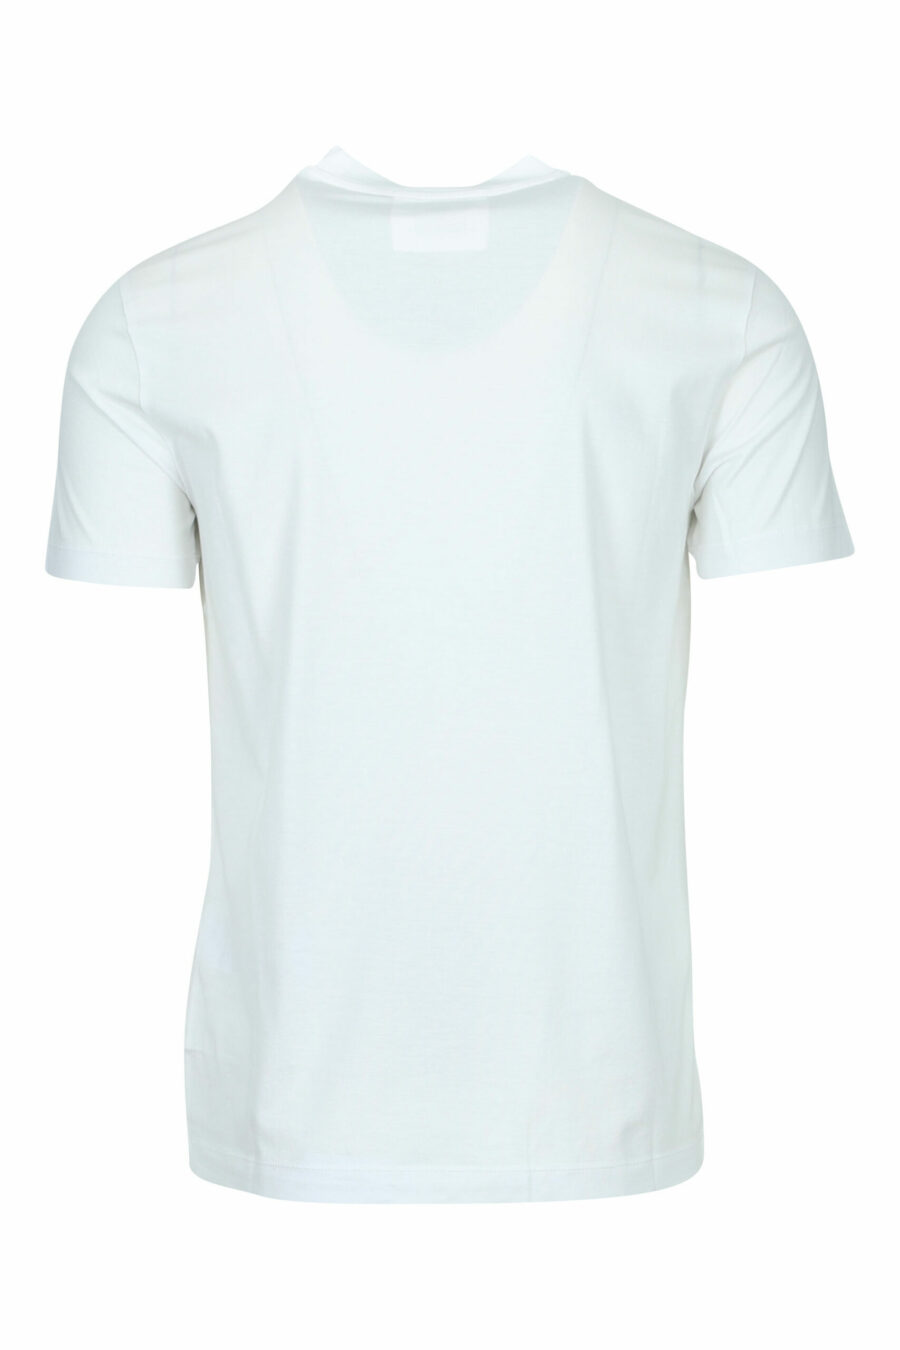 White T-shirt with minilogue "emporio" - 8059516200147 1 scaled